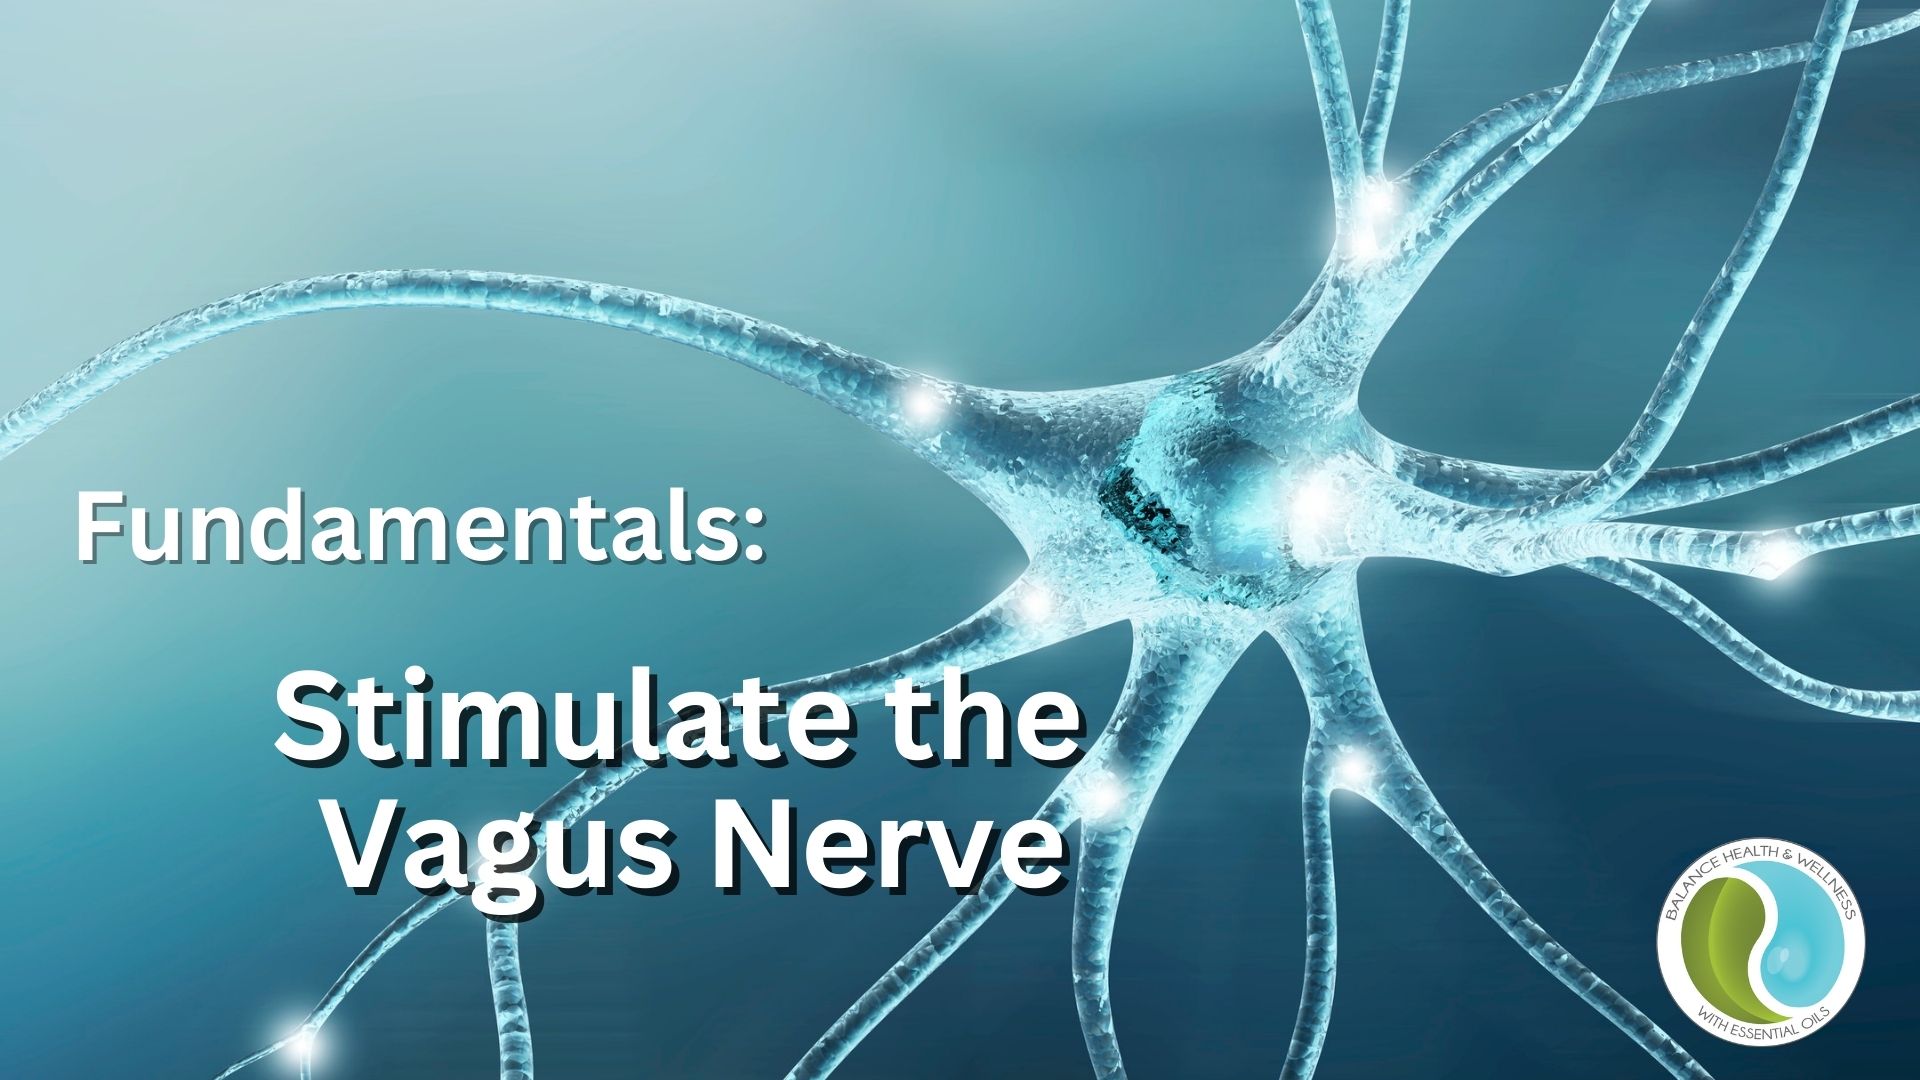 Supporting the Vagus Nerve